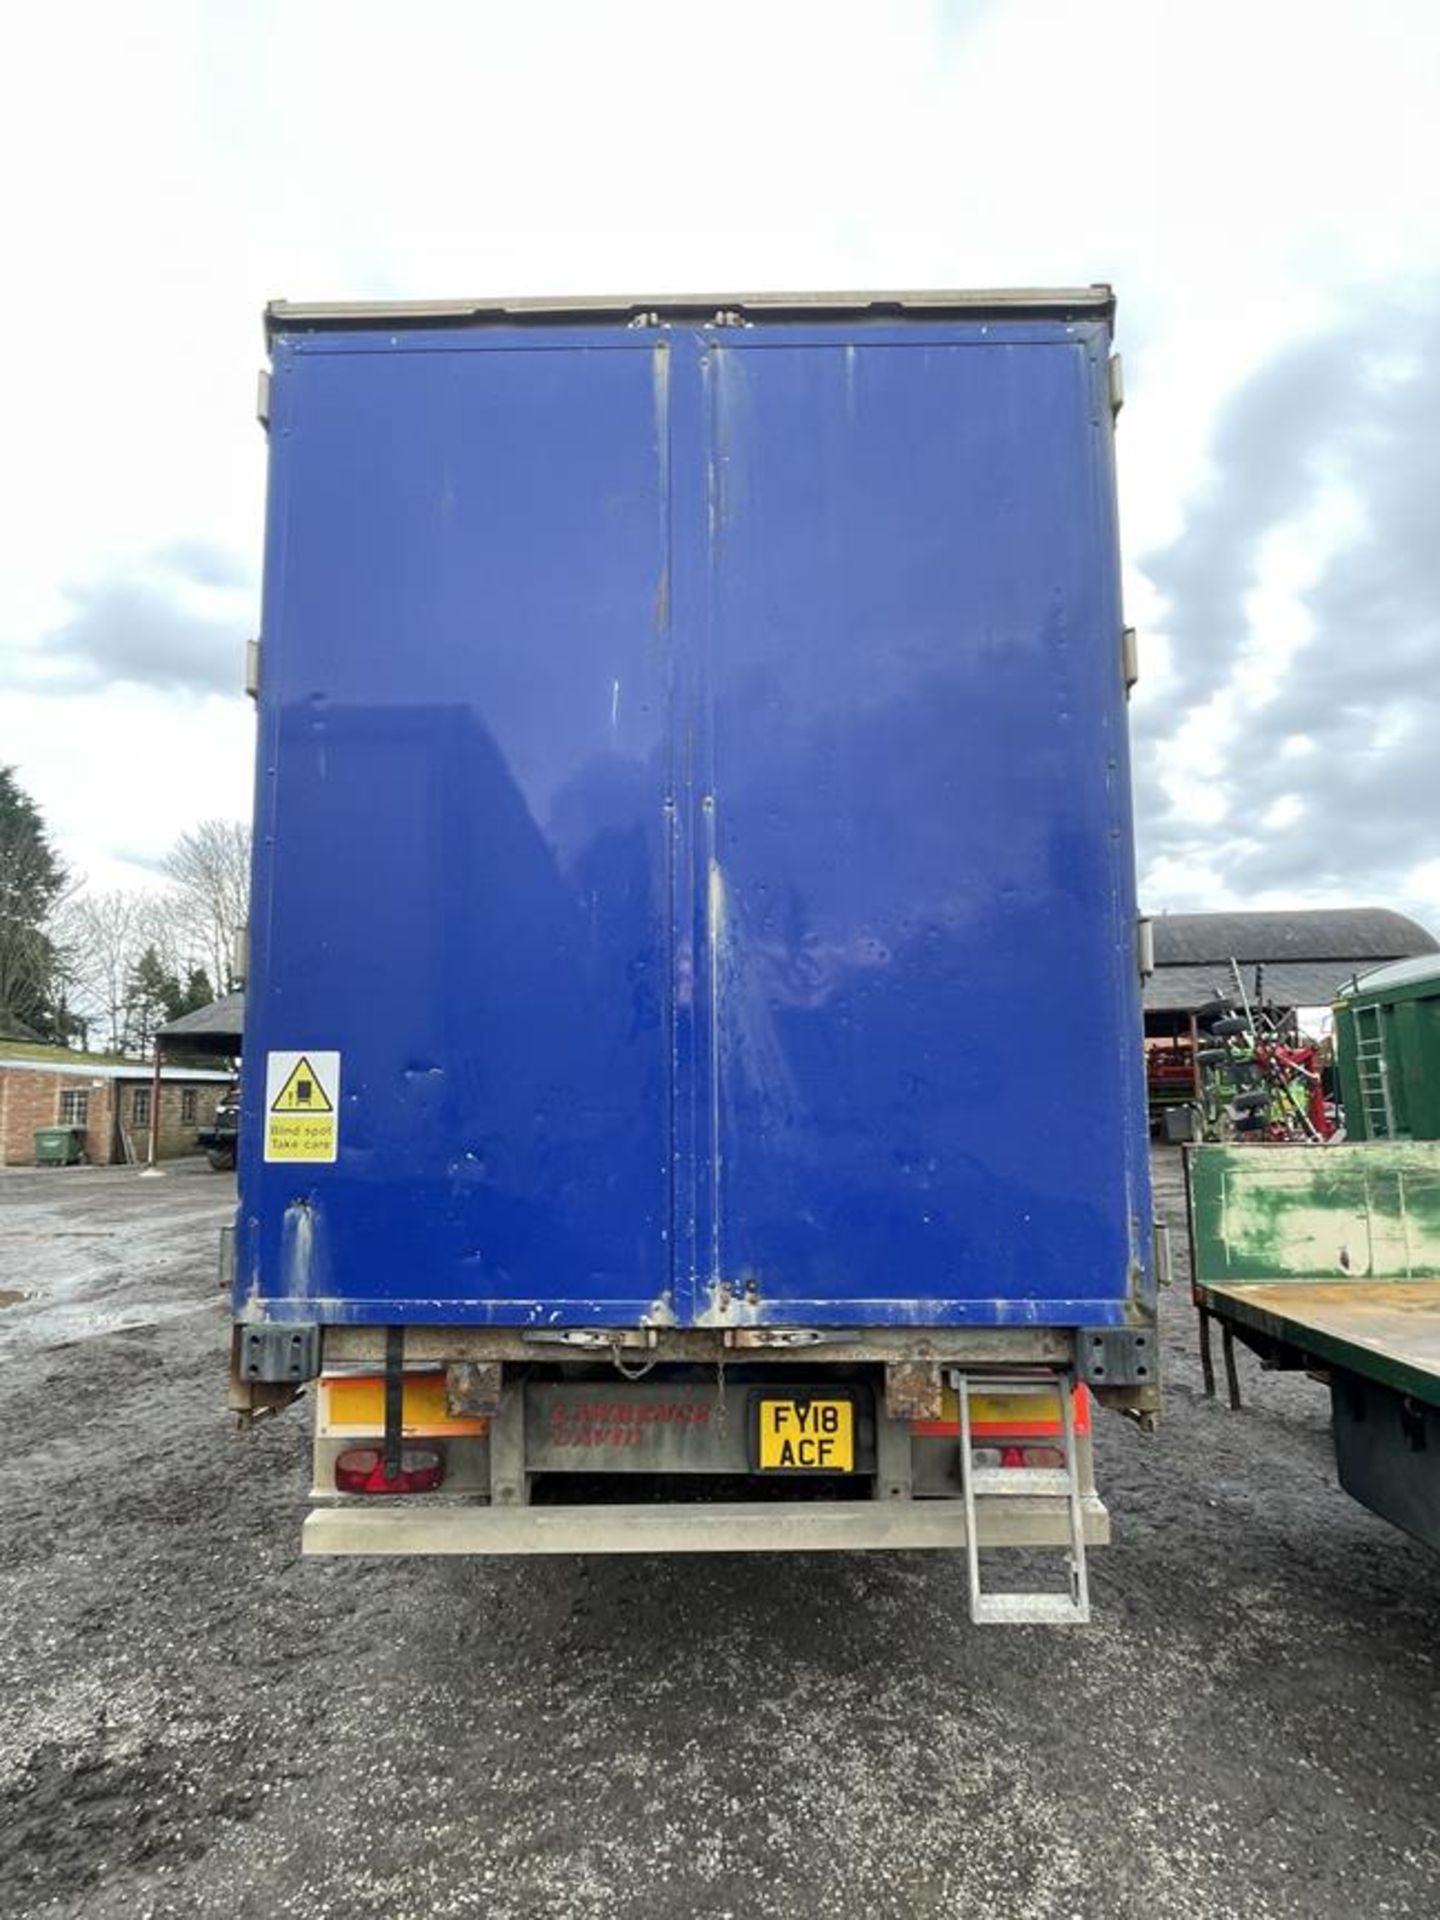 2006 Montracon EB+ ADR 25/2M Triple Axle Curtainside Trailer, VIN: 24688 with Rear Barn Doors. - Image 5 of 12